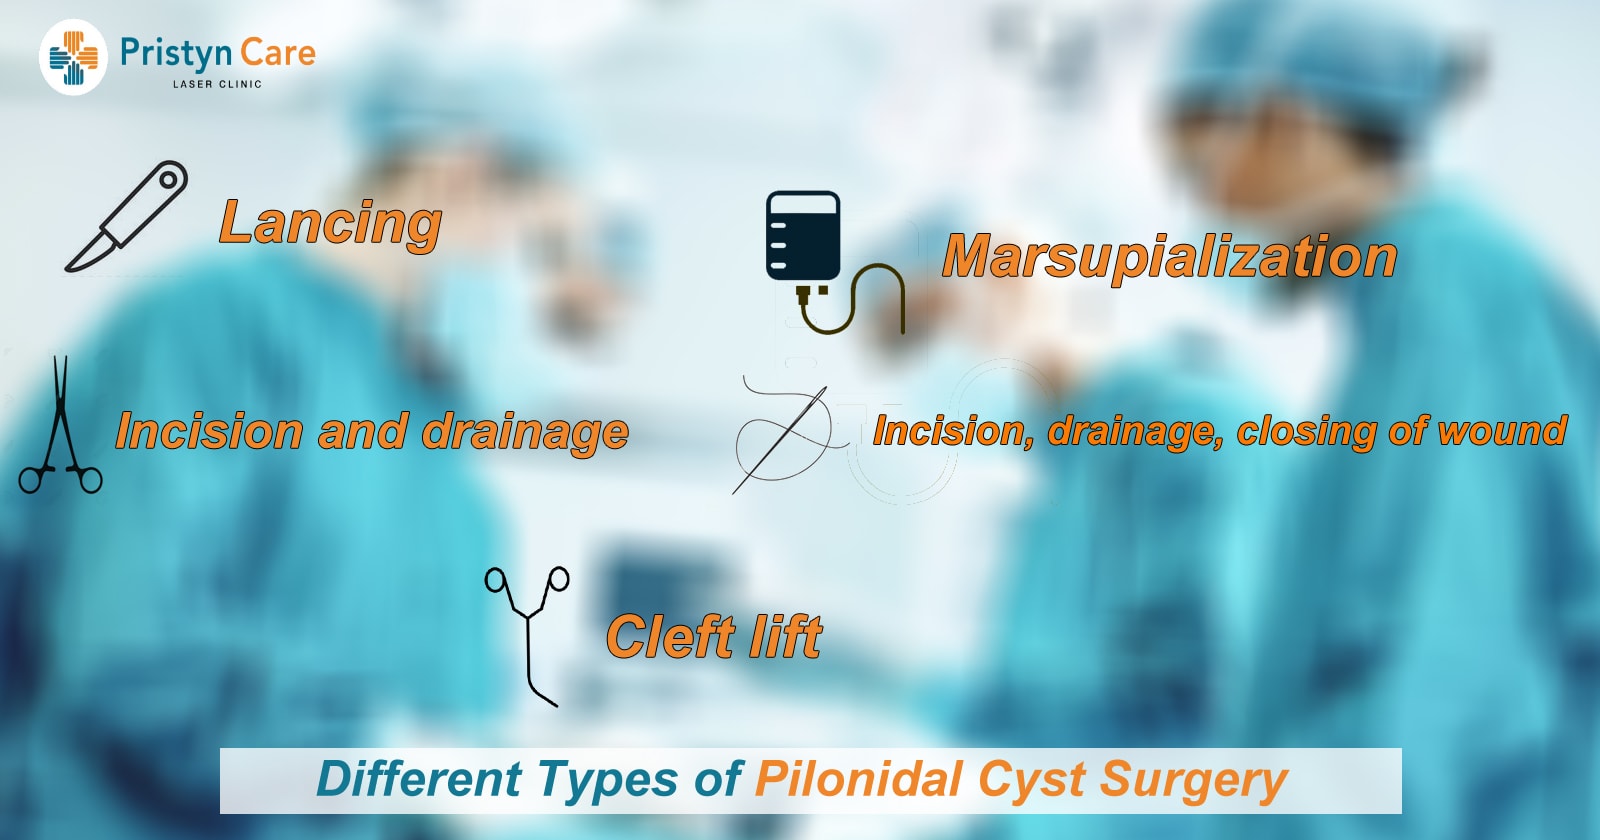 Different Types of Pilonidal Cyst Surgery